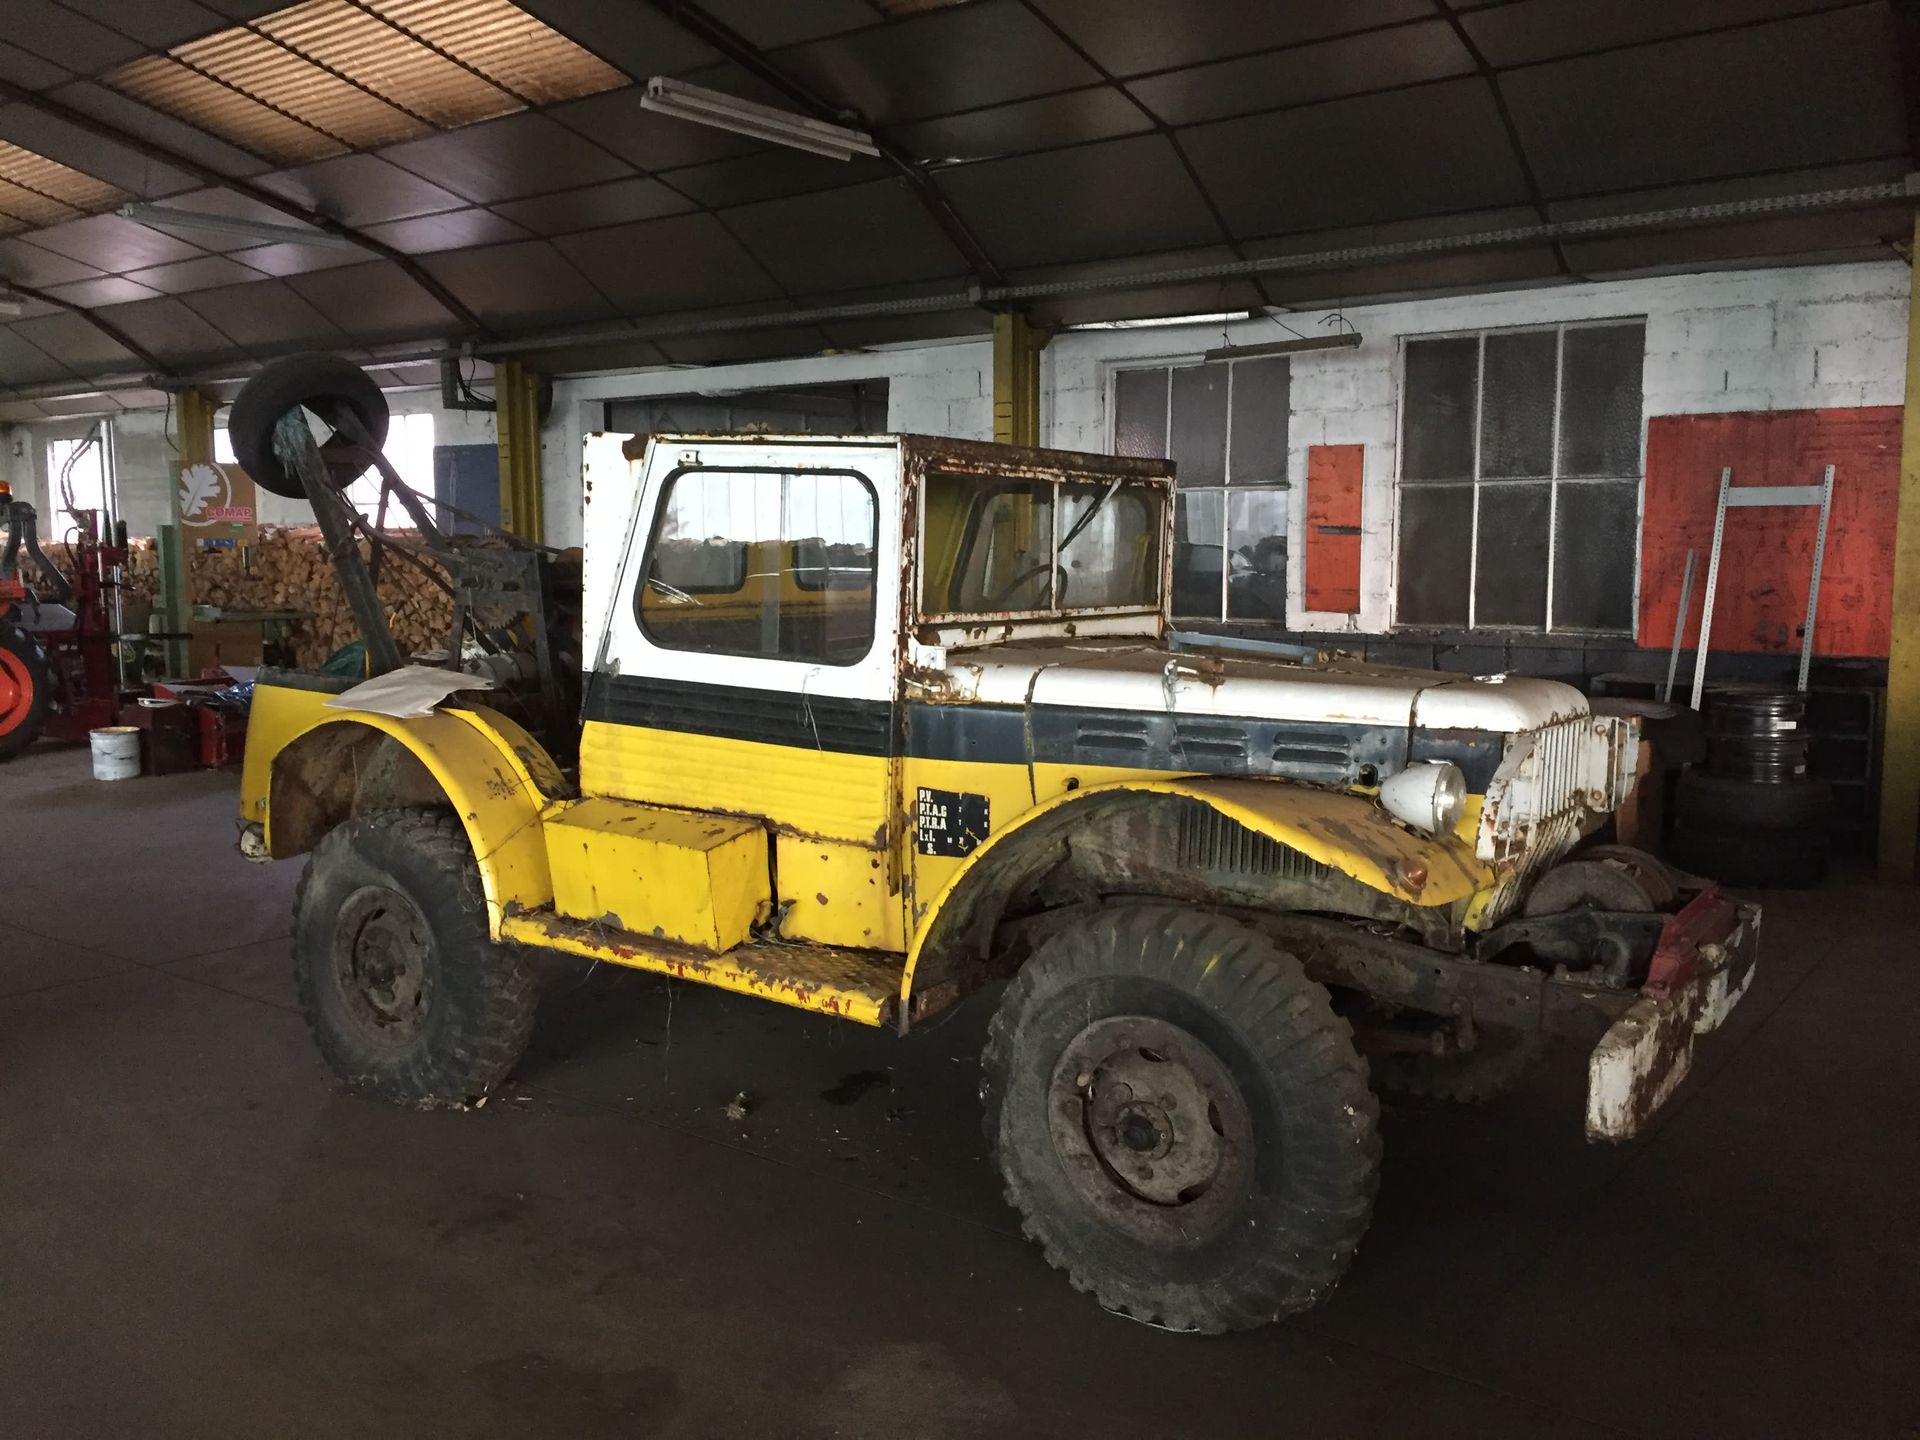 Command Car DODGE type WC 57 To be registered in CG collection

To be restored

&hellip;